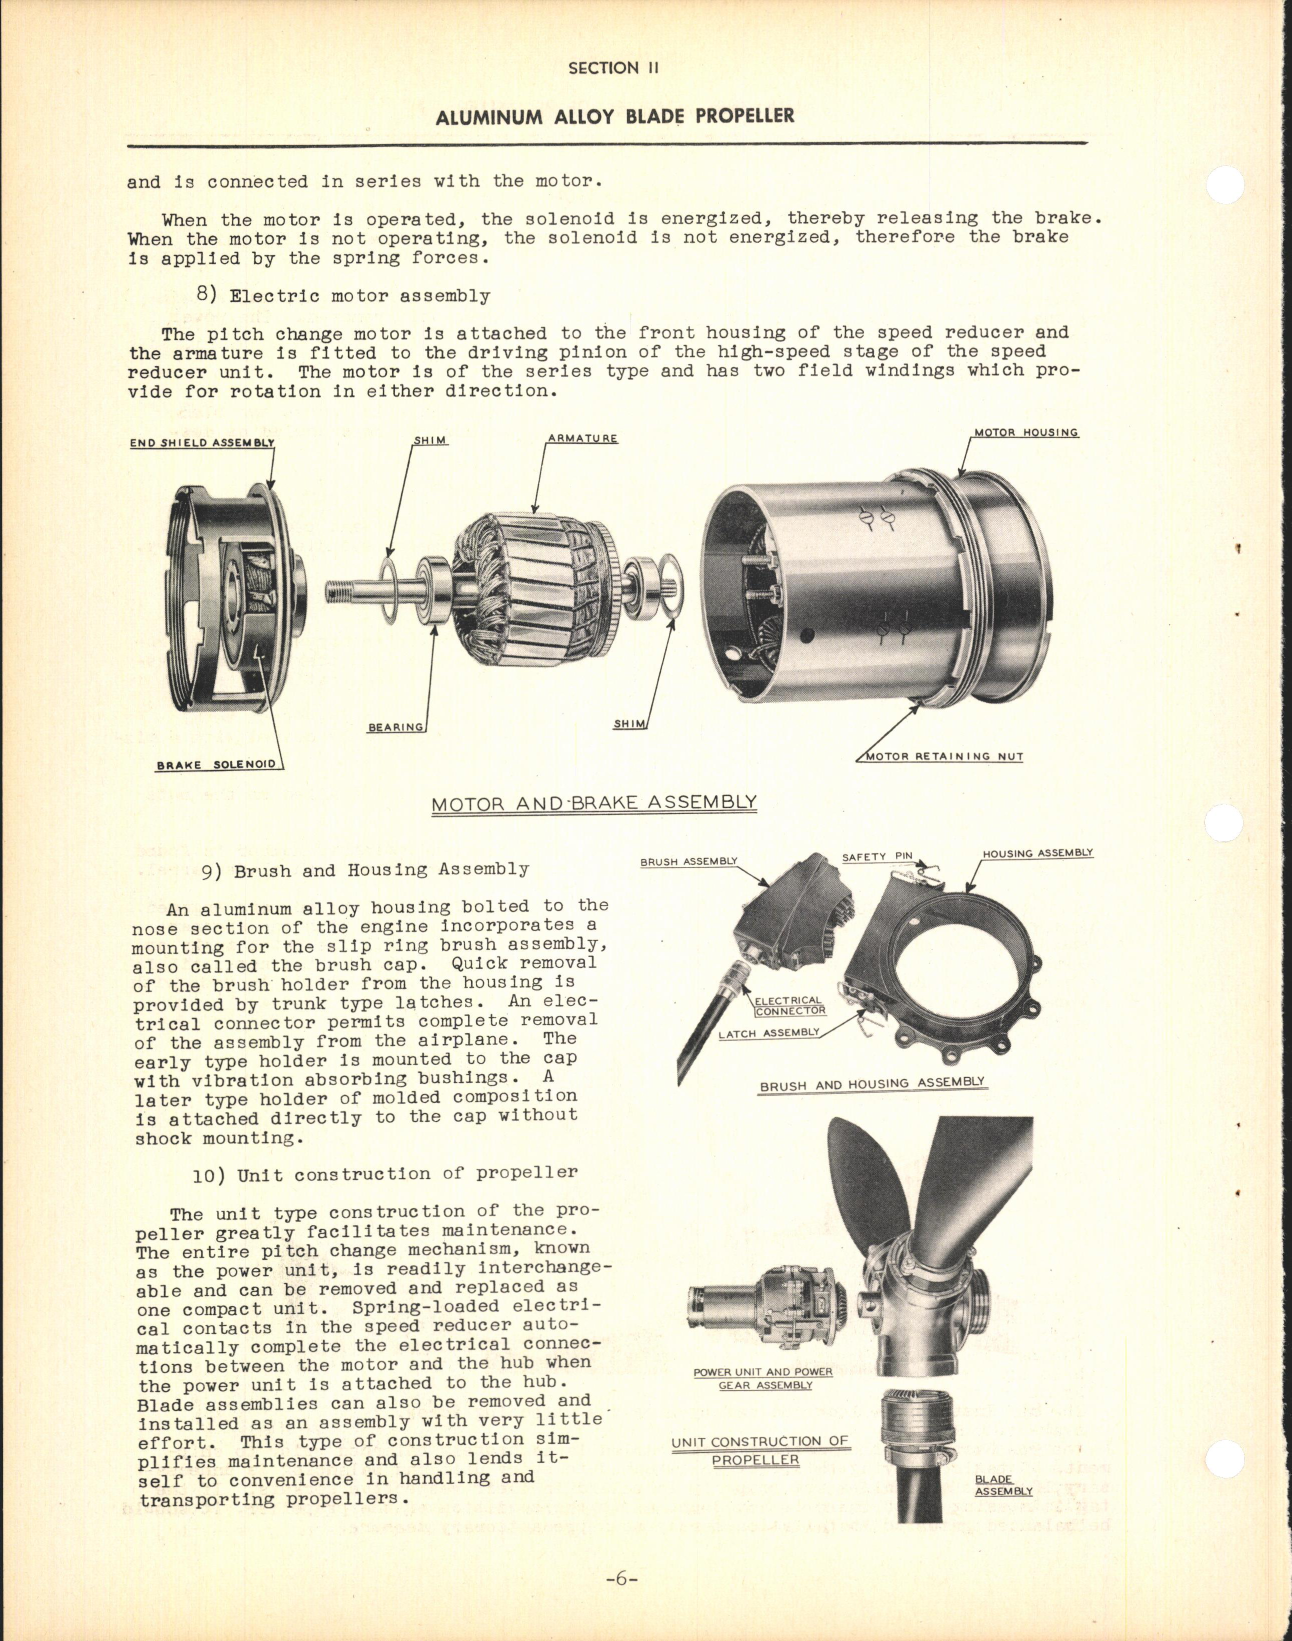 Sample page 8 from AirCorps Library document: Section 11 - Aluminum Alloy Blade Propeller (Three Blade)